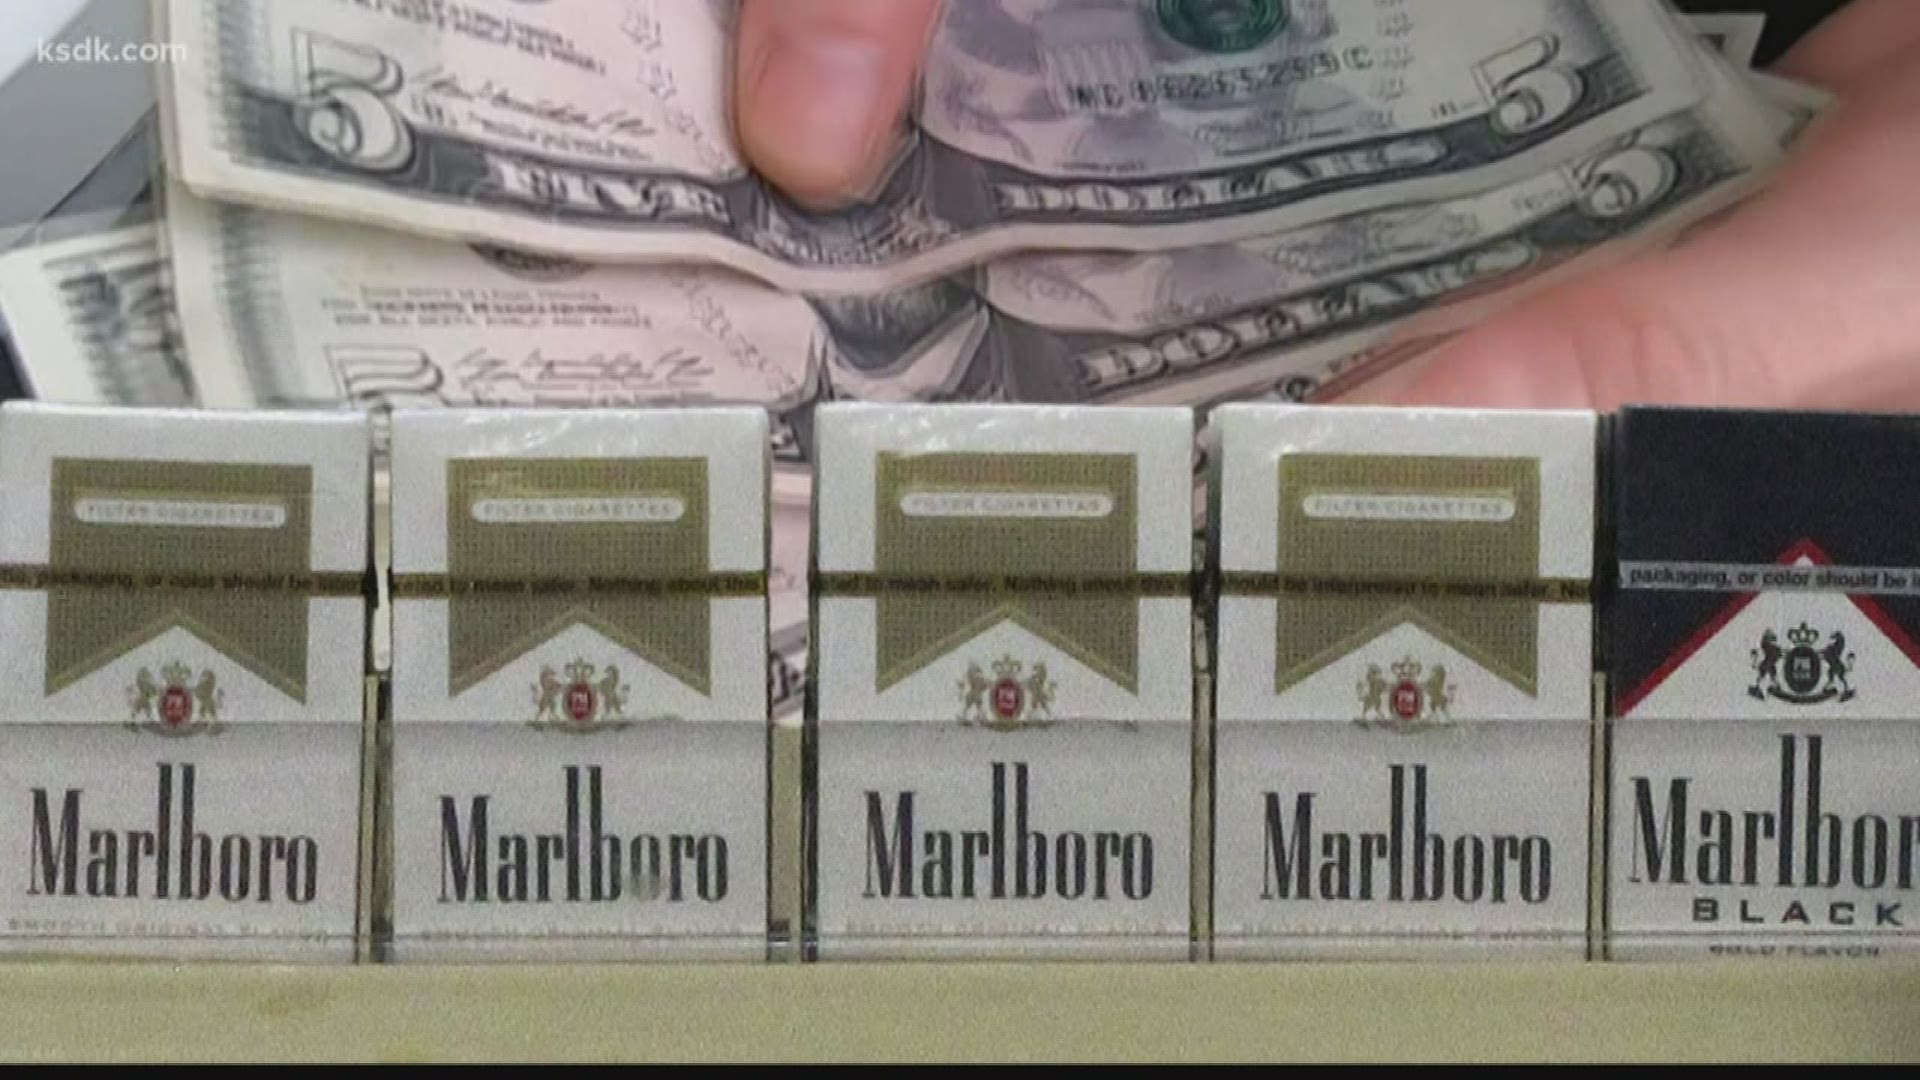 "If you don't want the state of Illinois coming after you for cigarette taxes, pay in cash." That's the advice one woman is giving on Facebook but is it true?